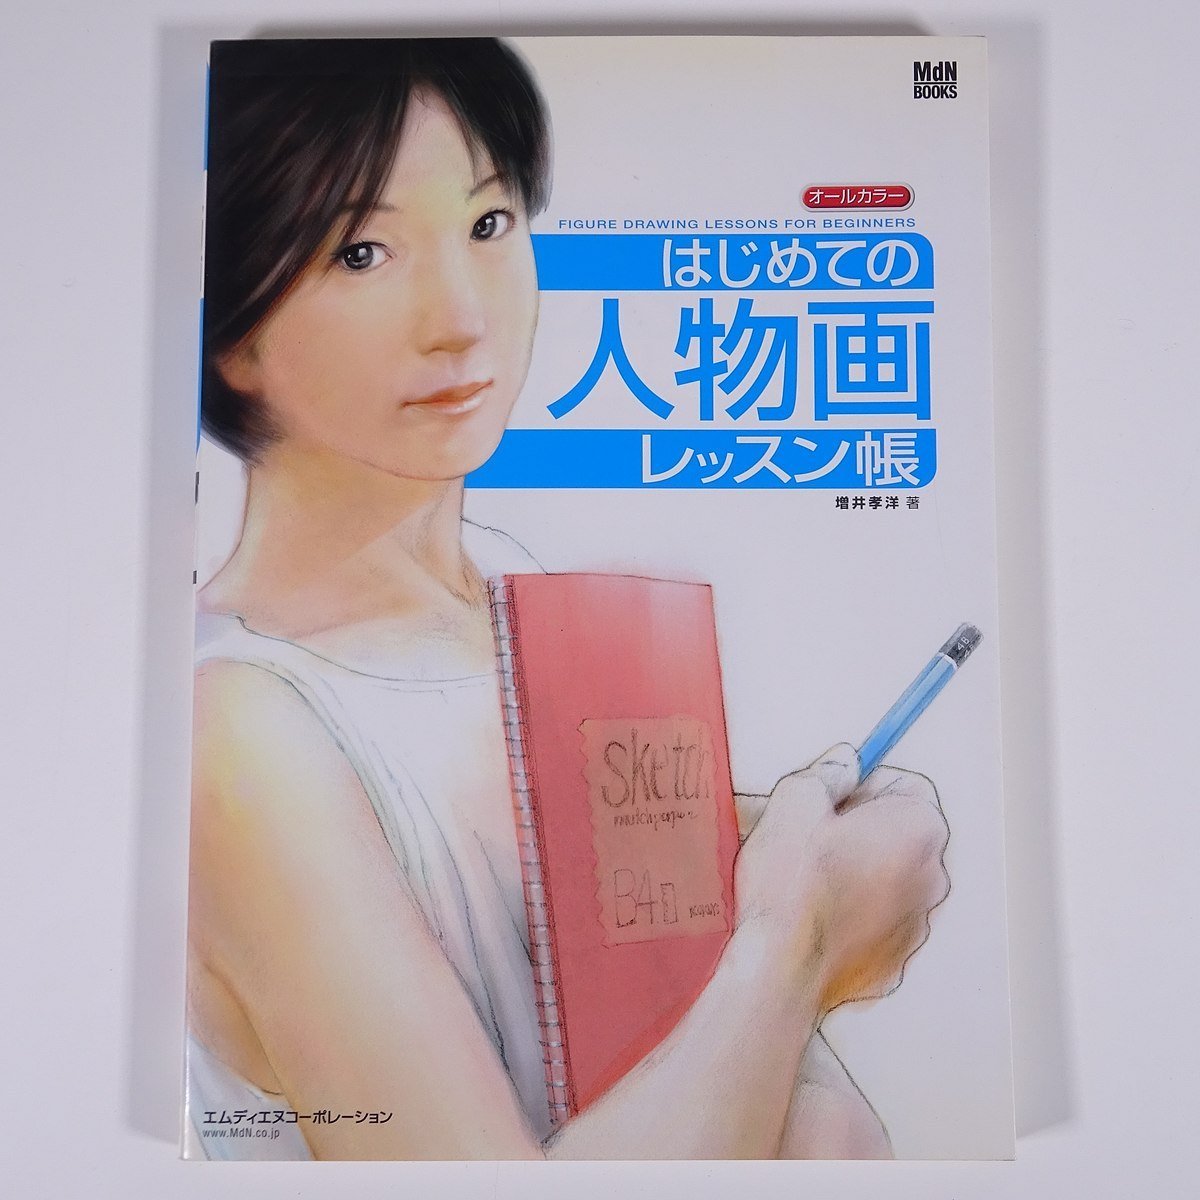 First Figure Drawing Lesson Book, Full Color, Takahiro Masui, MdN, 2003, Large Book, Art, Fine Art, Painting, Illustration, Drawing, Technique Book, art, Entertainment, Painting, Technique book